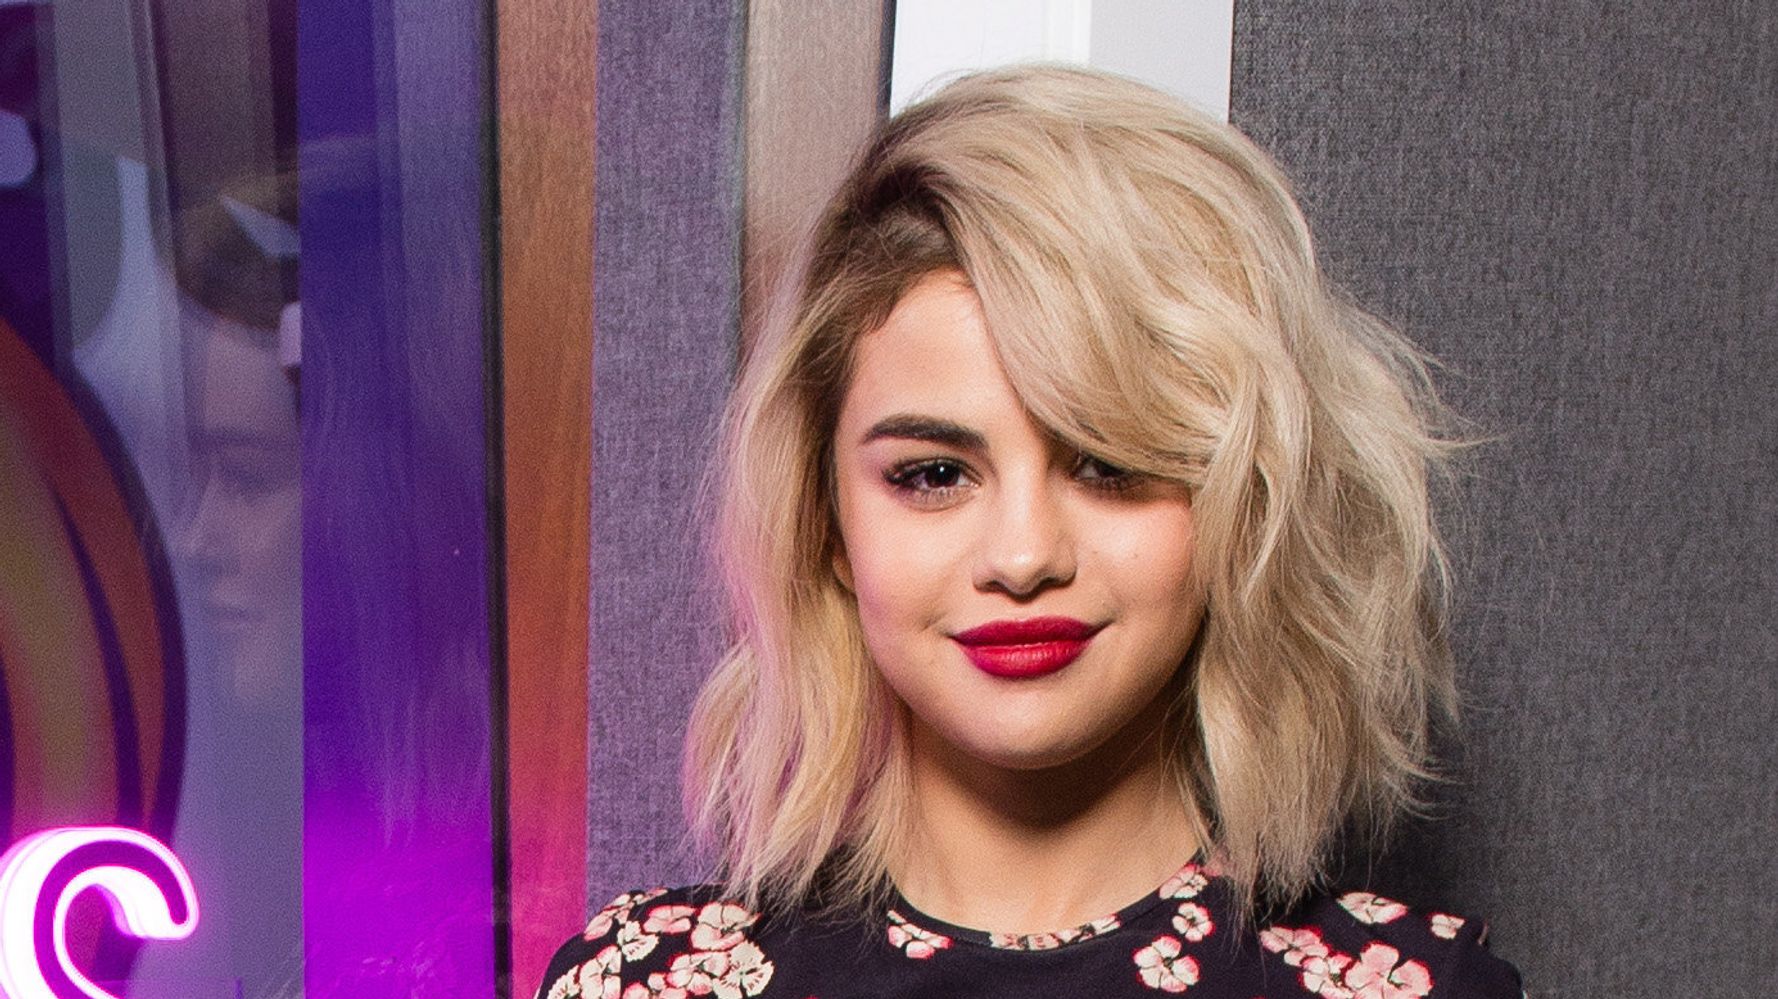 Selena Gomez Wore 4 Head-Turning Outfits In Just One Day | HuffPost Life